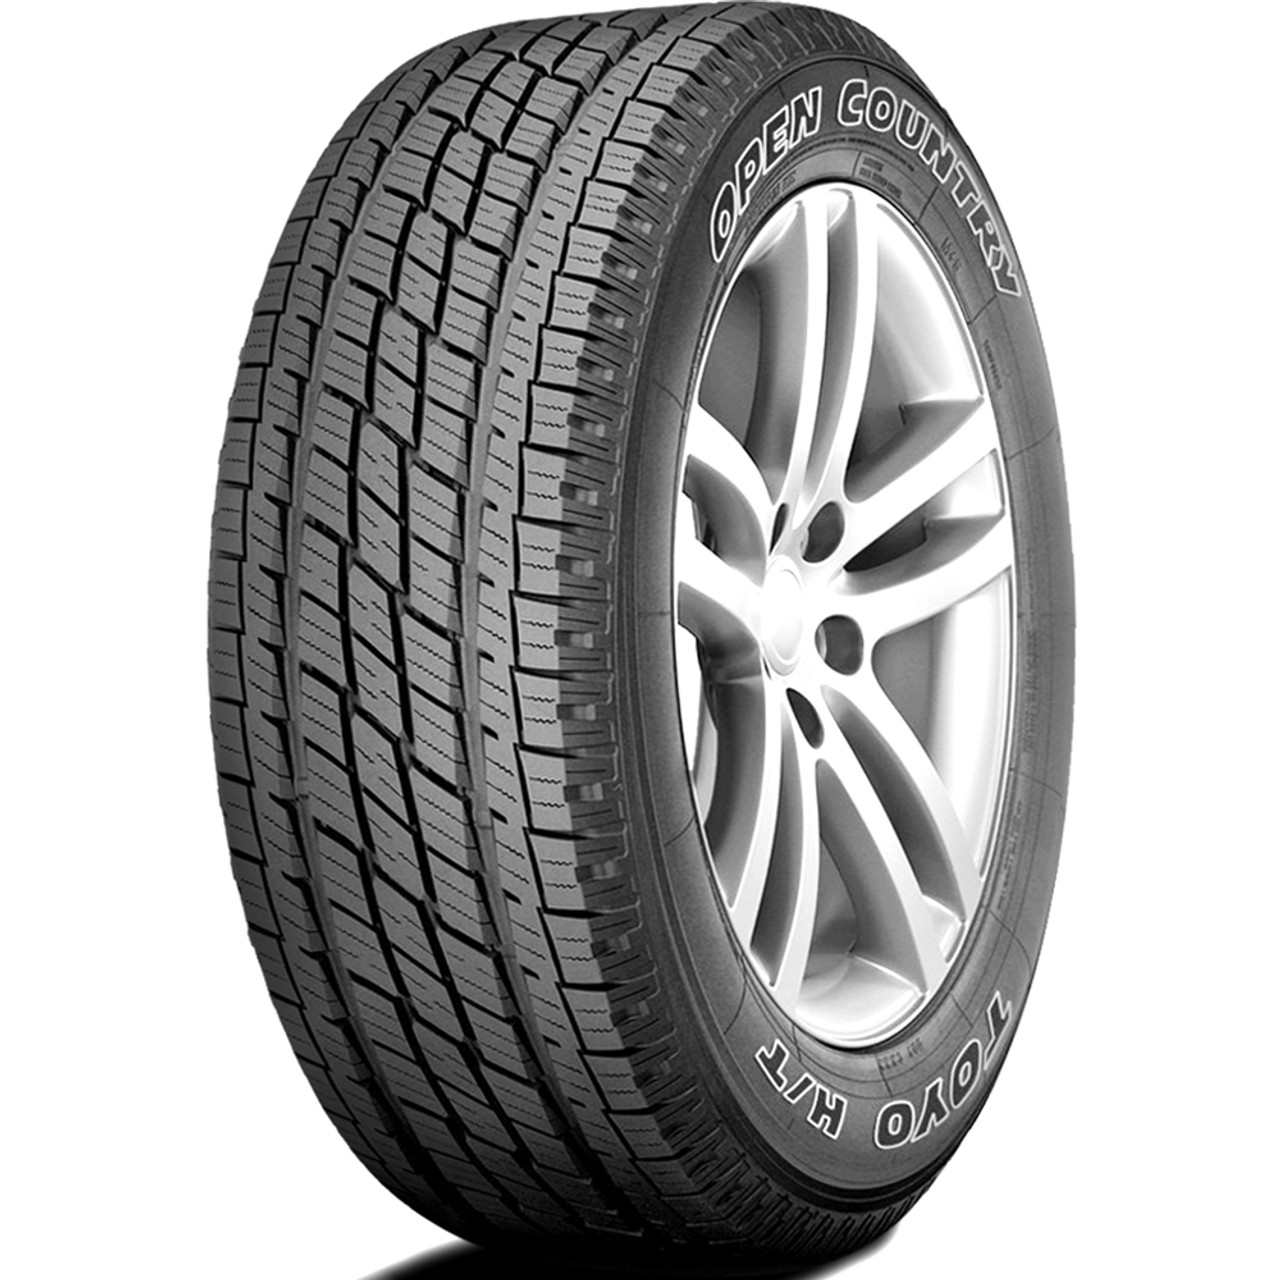 Toyo Open Country H T 235 75r15 105s As A S All Season Tire